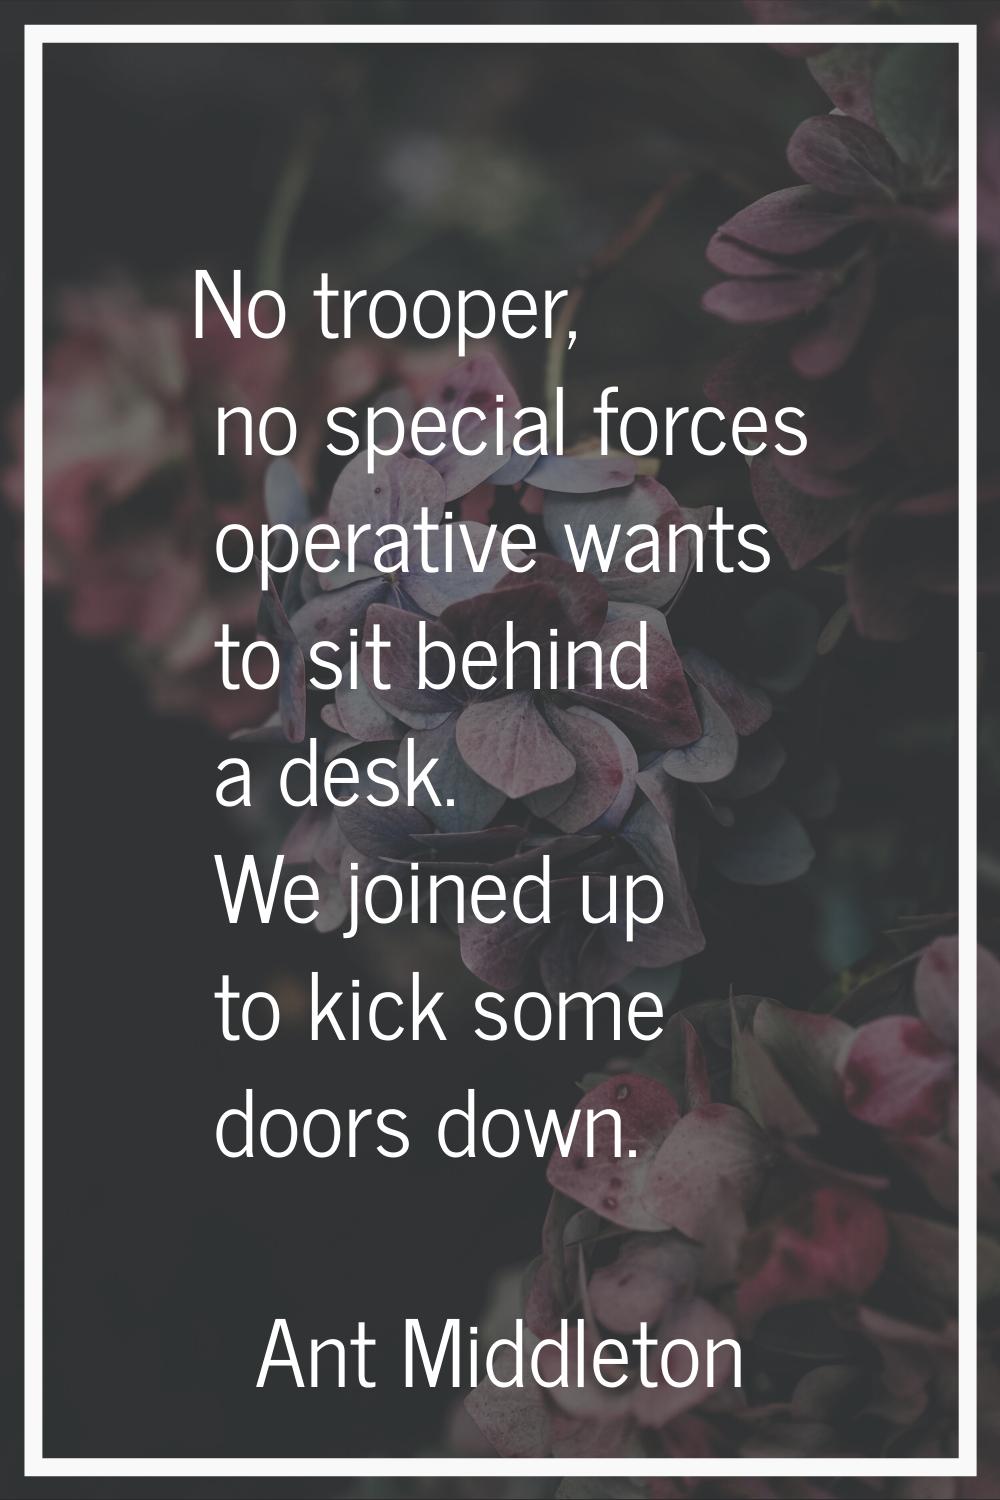 No trooper, no special forces operative wants to sit behind a desk. We joined up to kick some doors